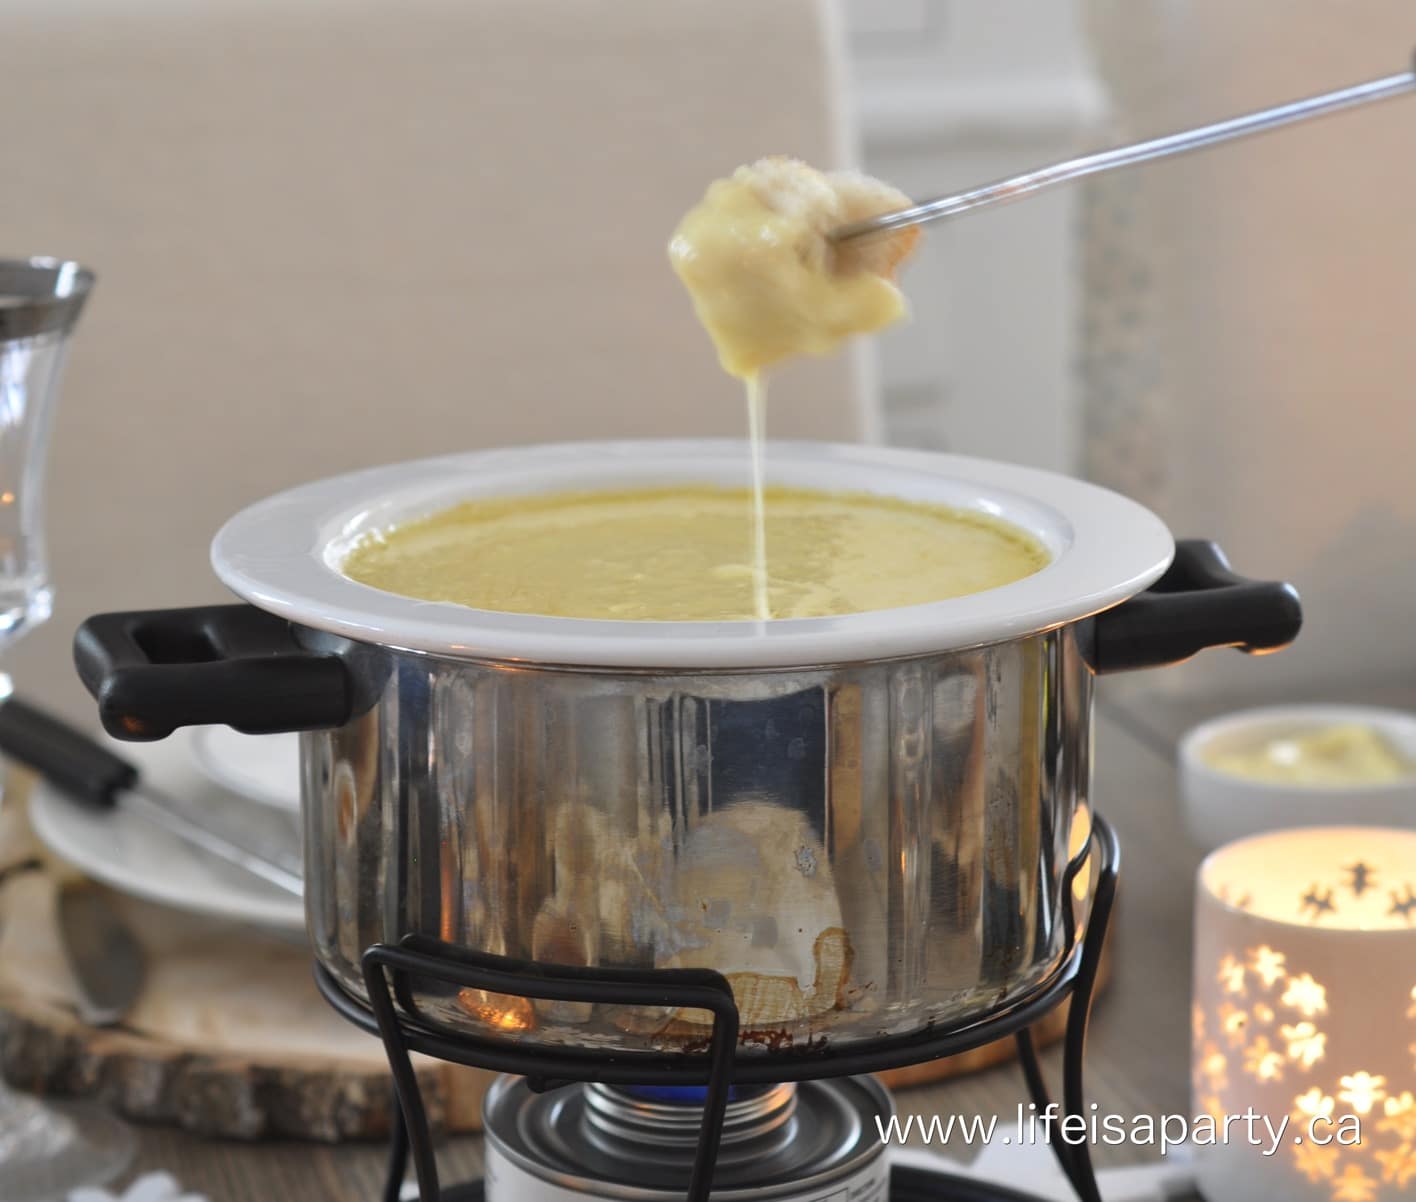 Cheese fondue pot with a piece of bread dipping in and dripping cheese.